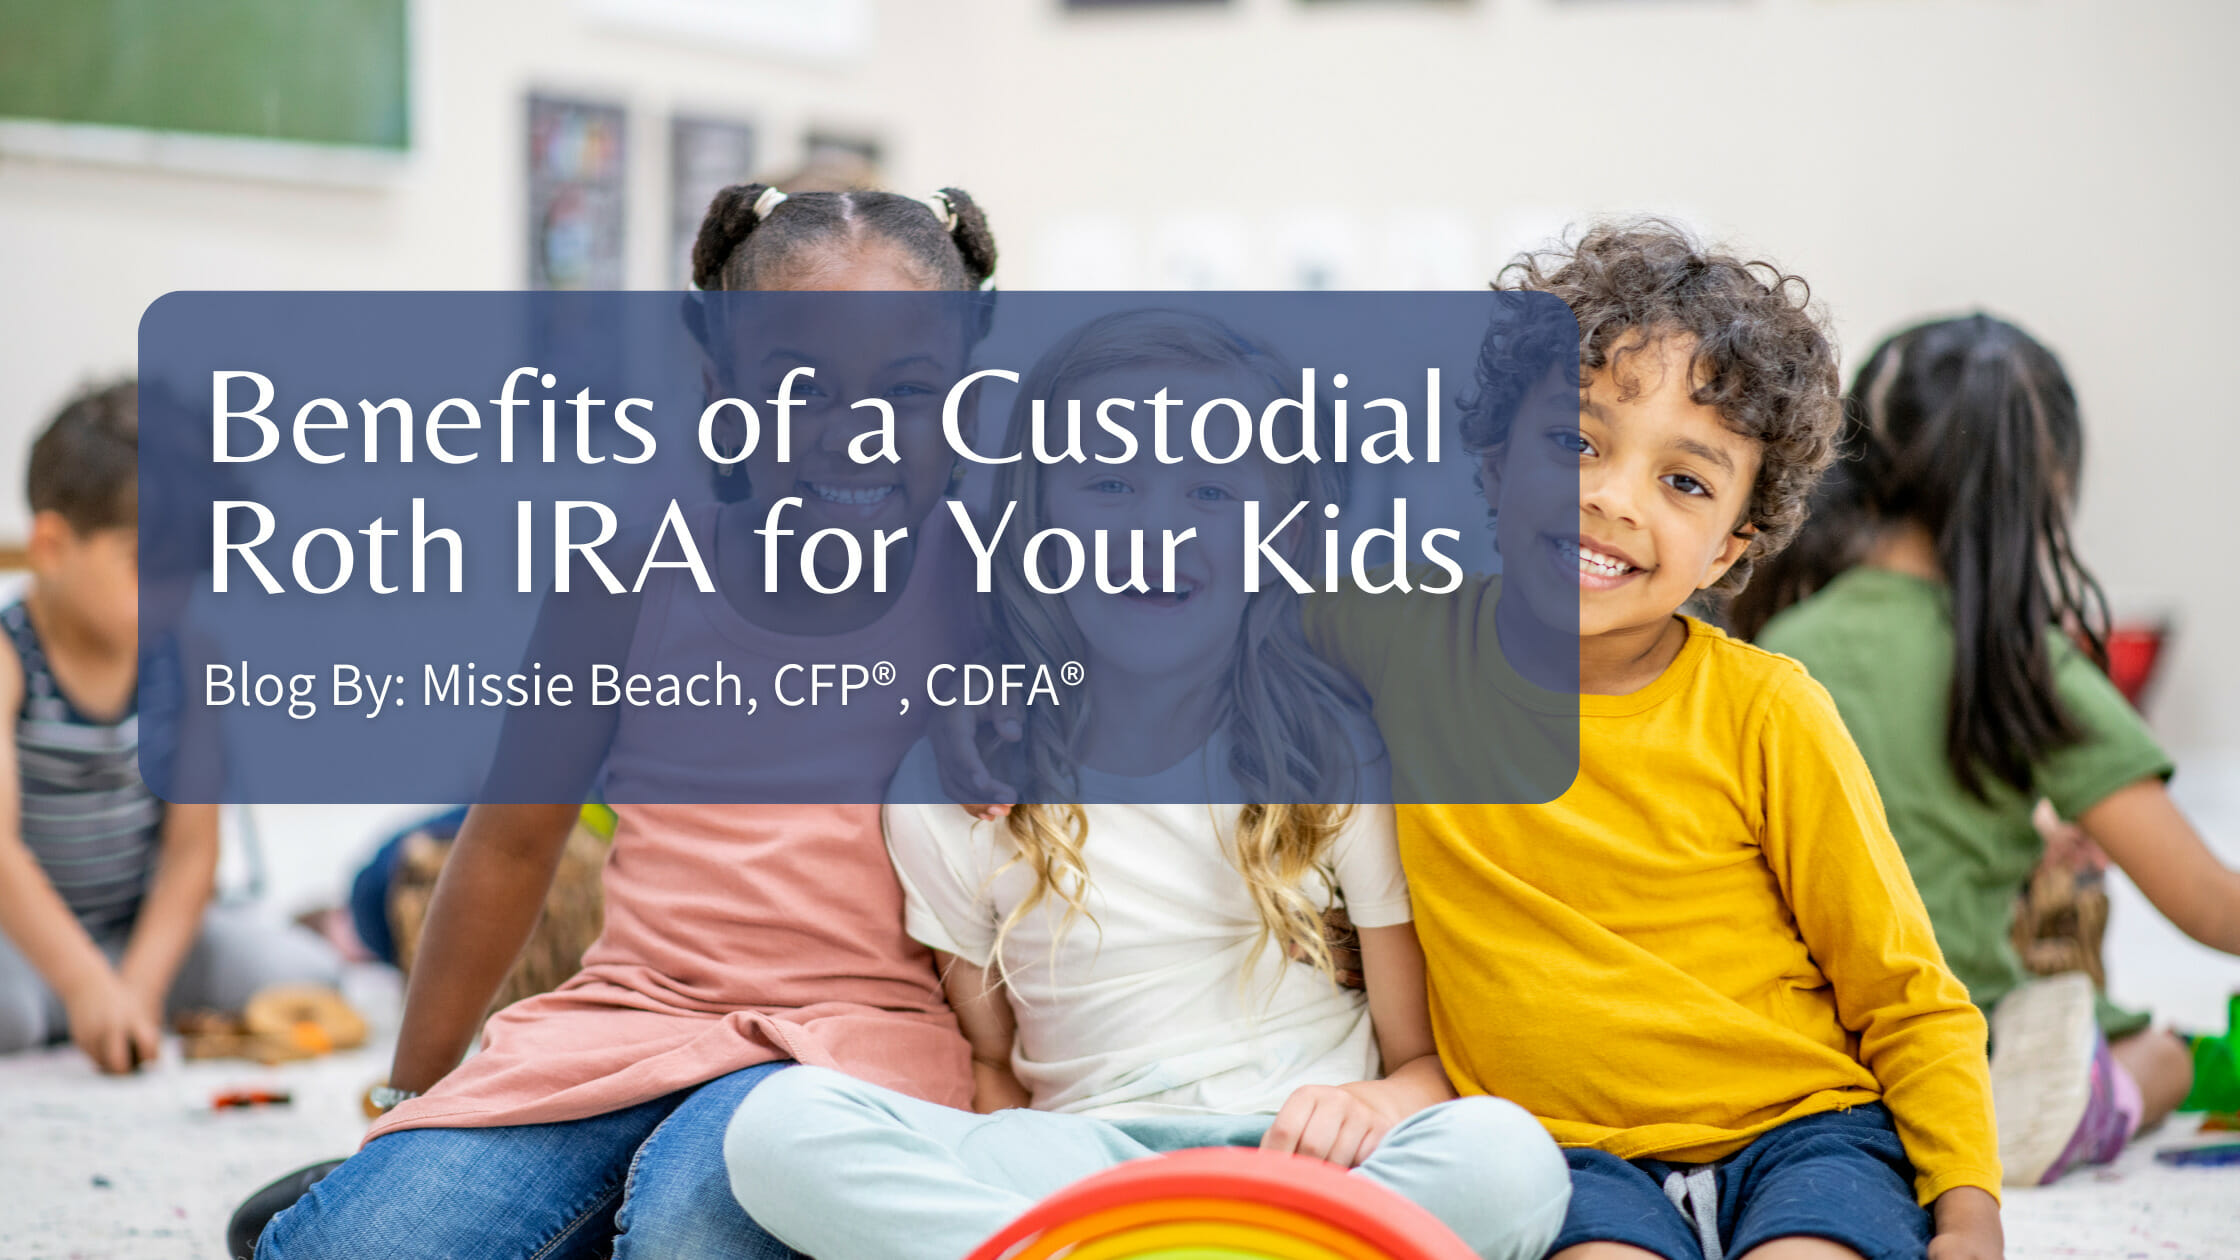 Benefits of a Custodial Roth IRA for Your Kids